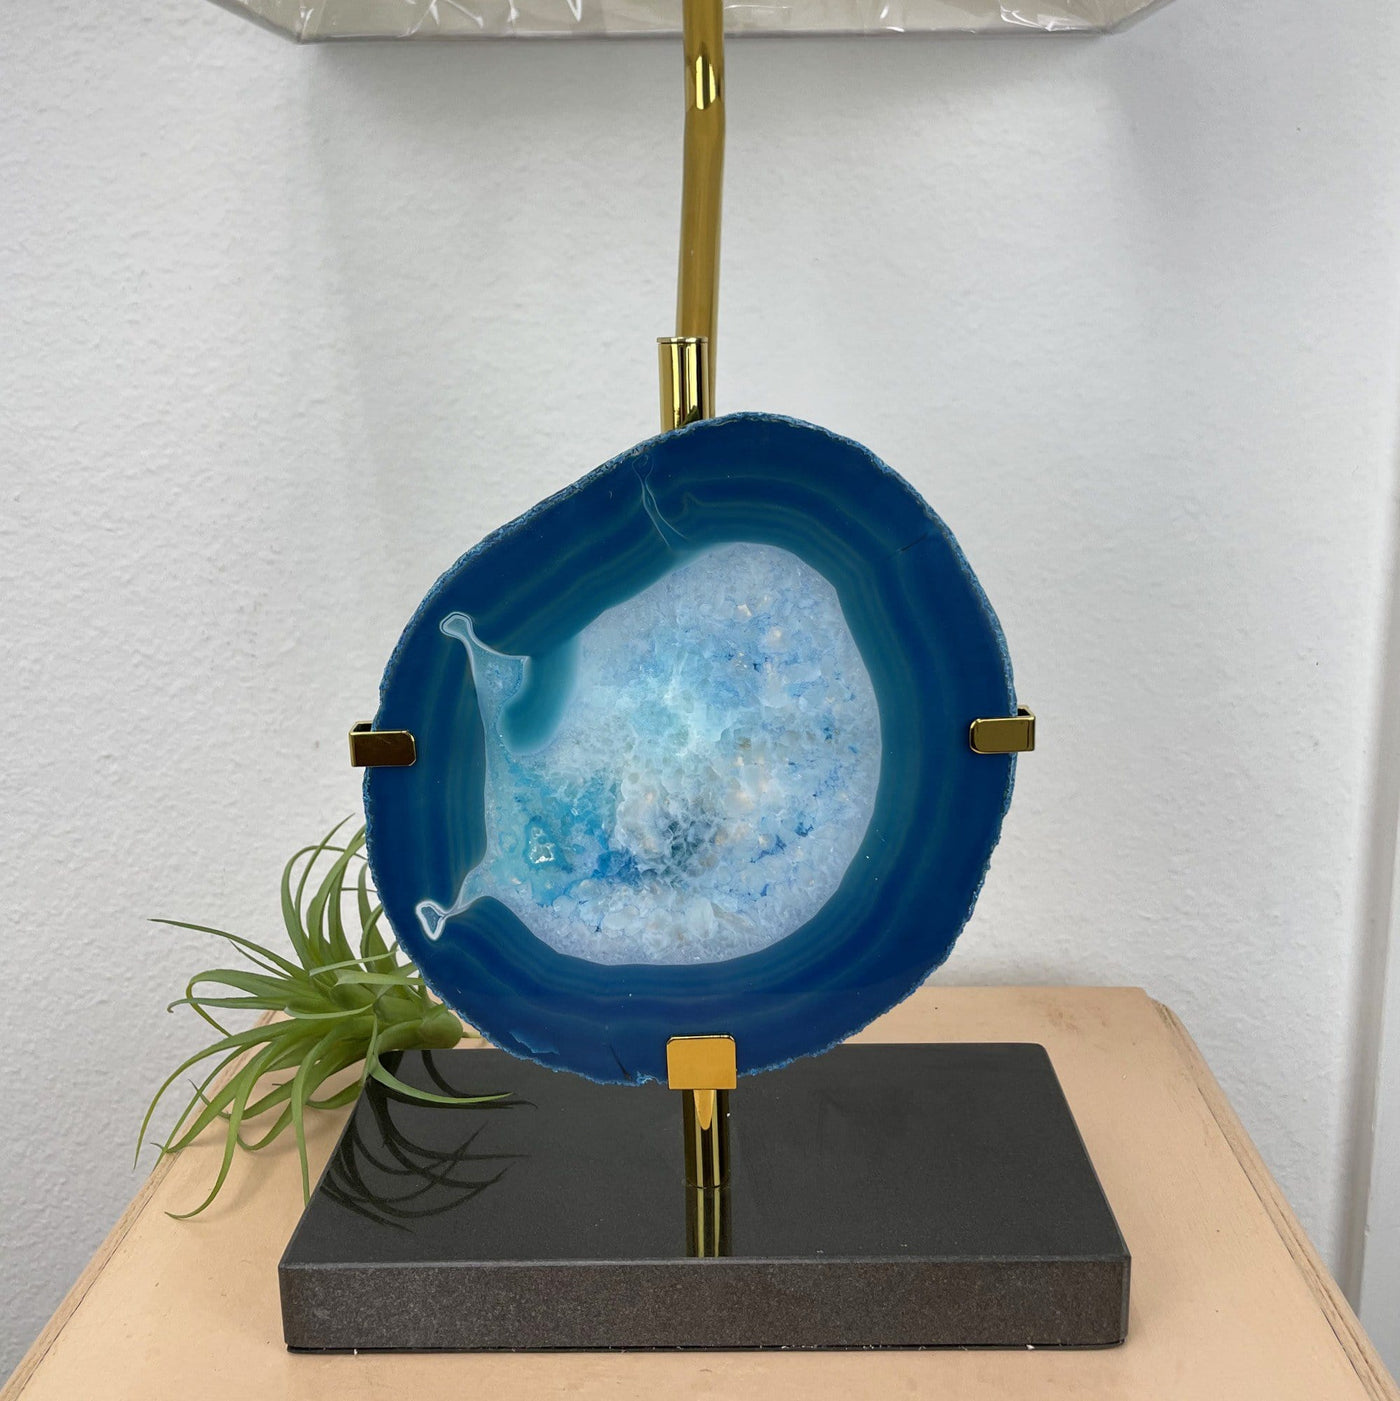 A teal agate slice on a gold lamp on top of a table